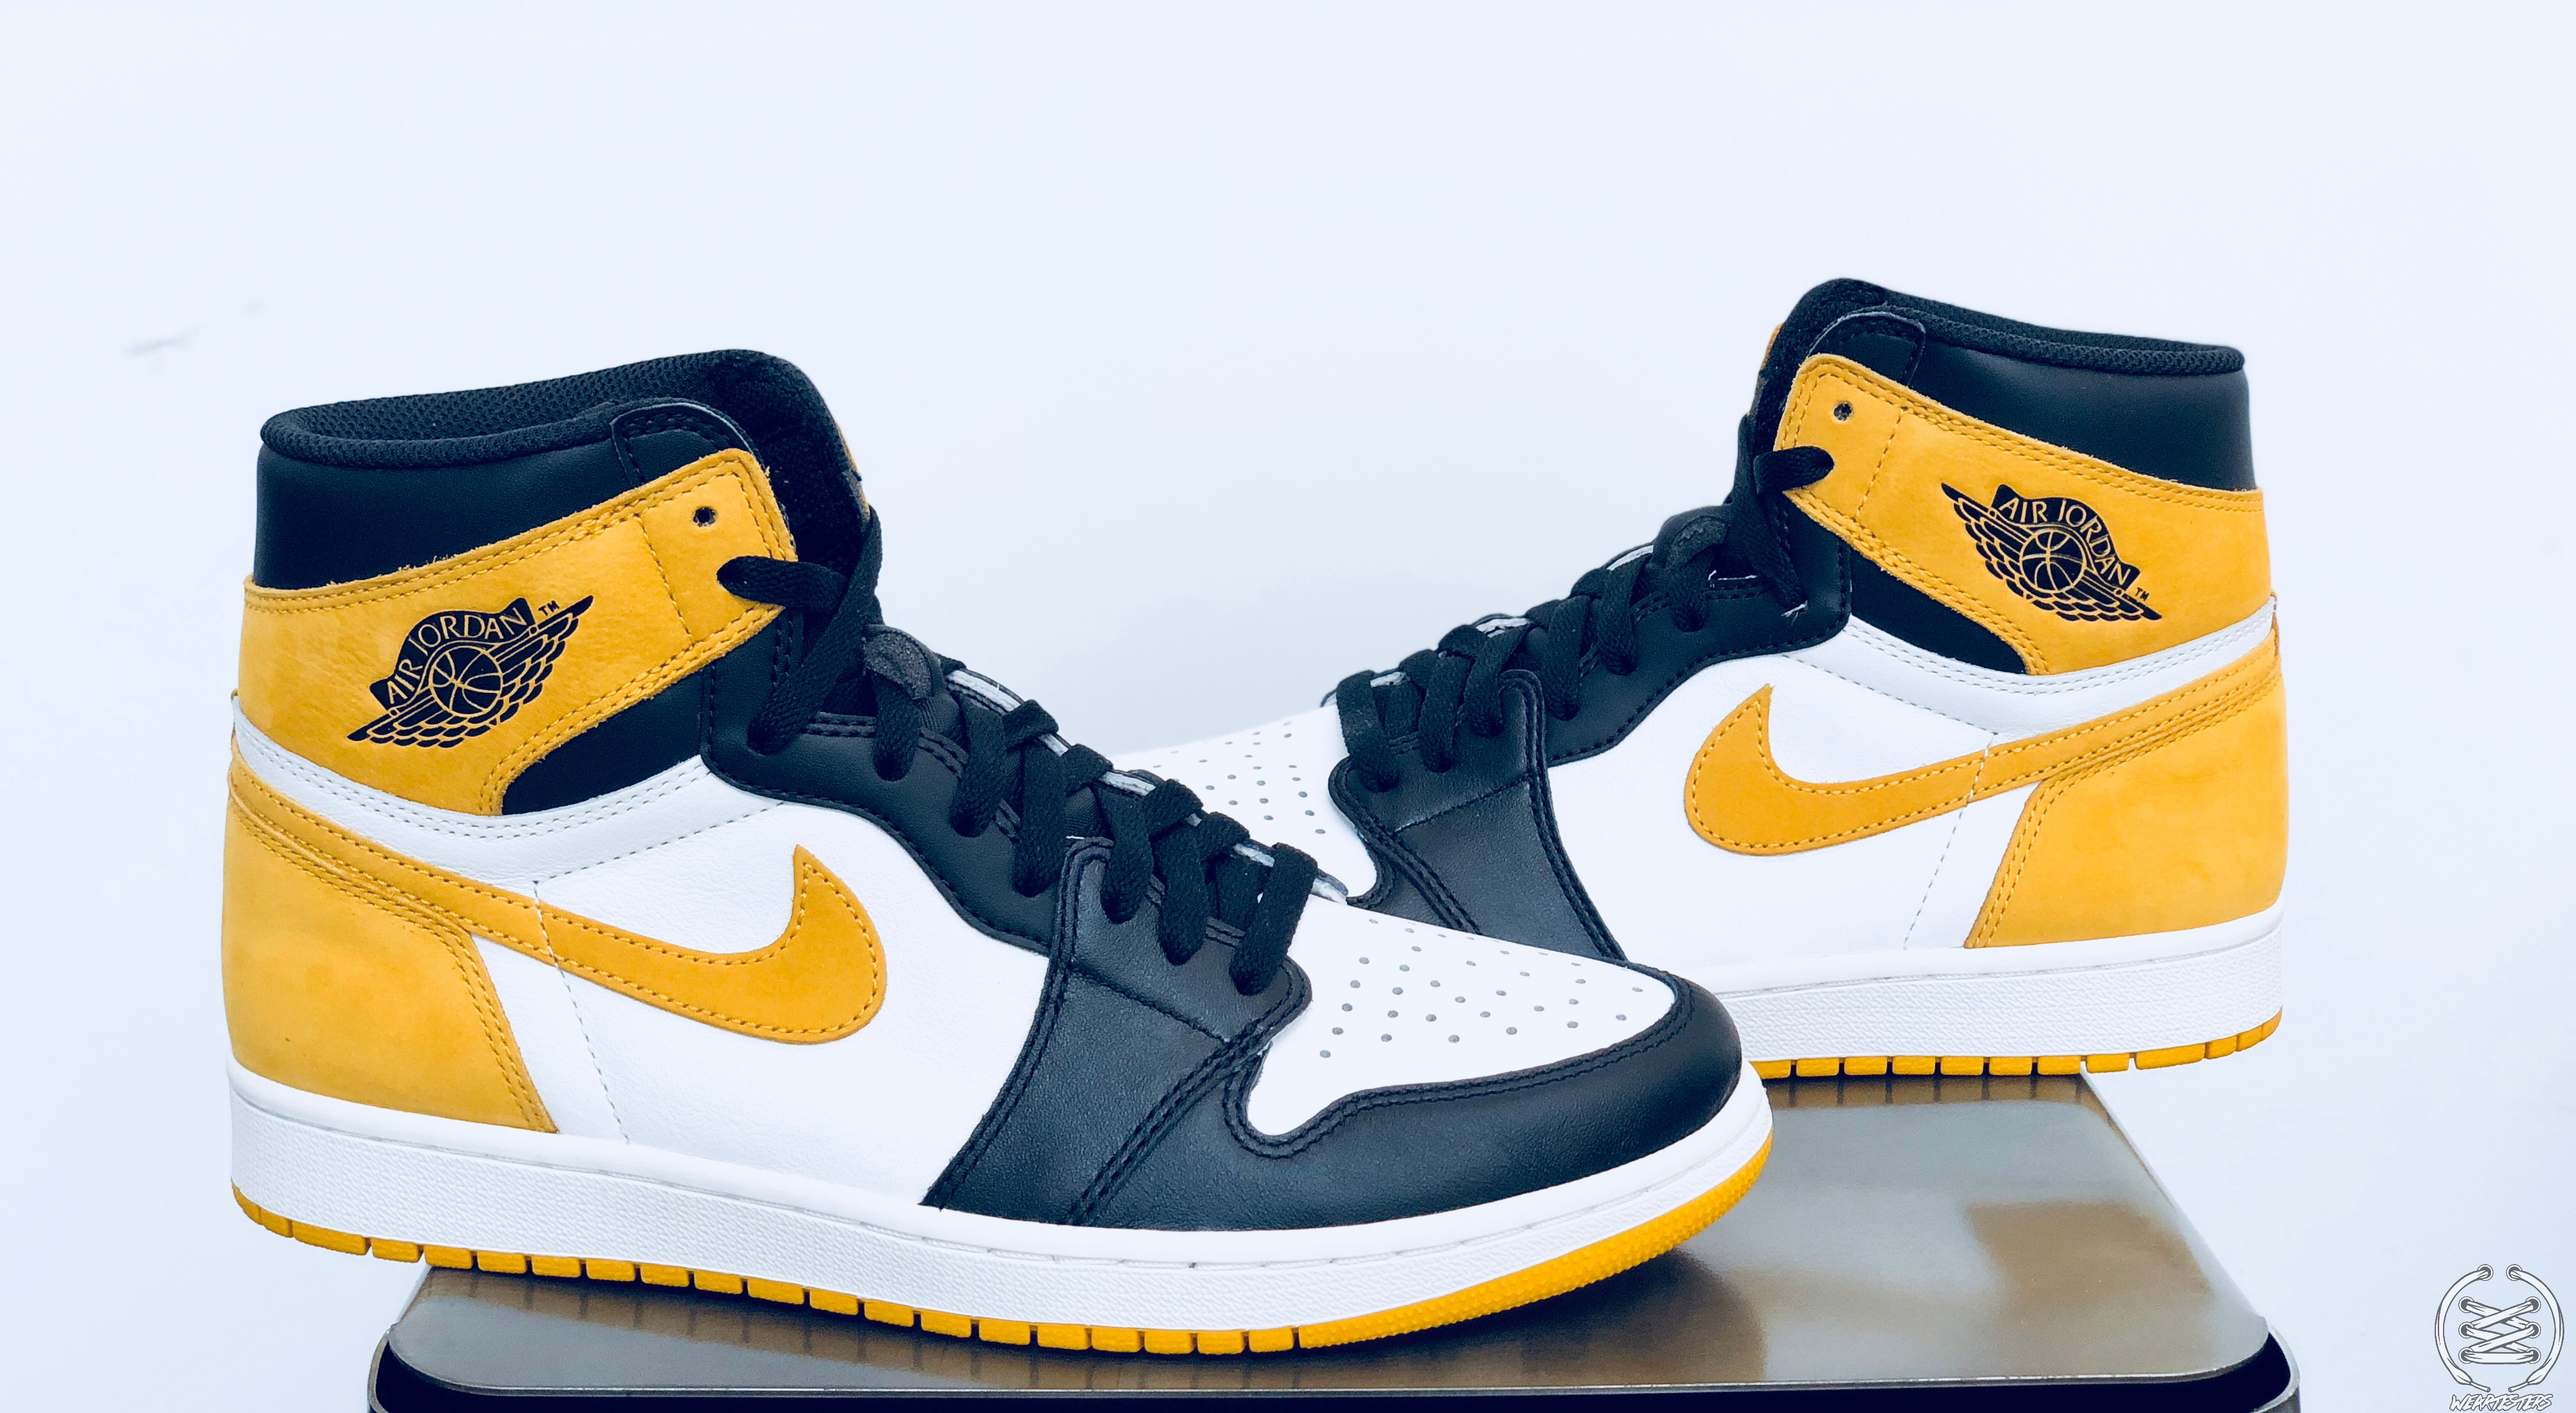 Air Jordan 1 Yellow Ochre Best Hand in the Game collection 2